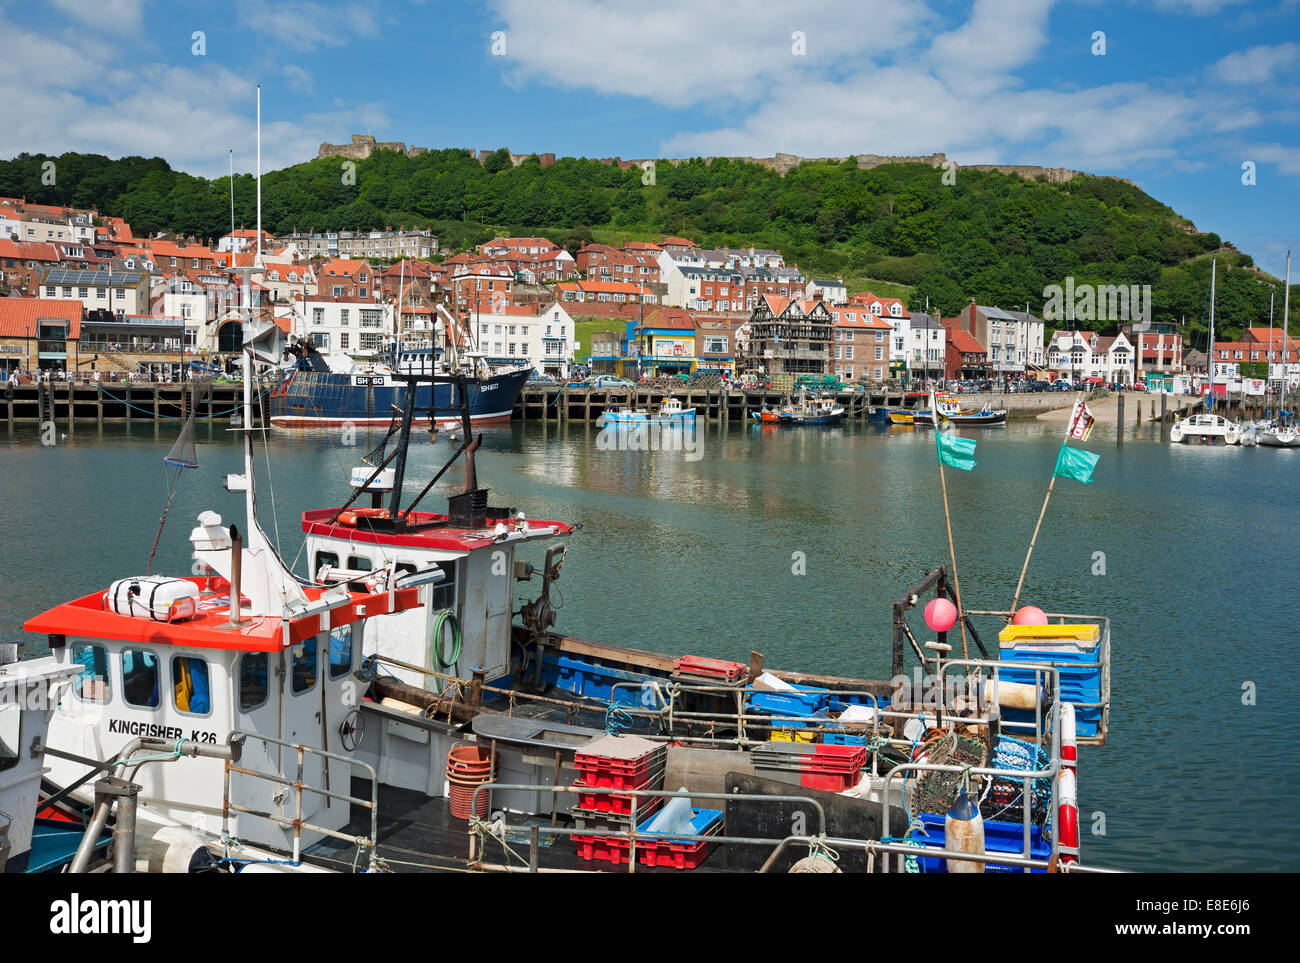 Fishing boat boats in the harbour in summer Scarborough seafront town resort North Yorkshire England UK United Kingdom GB Great Britain Stock Photo